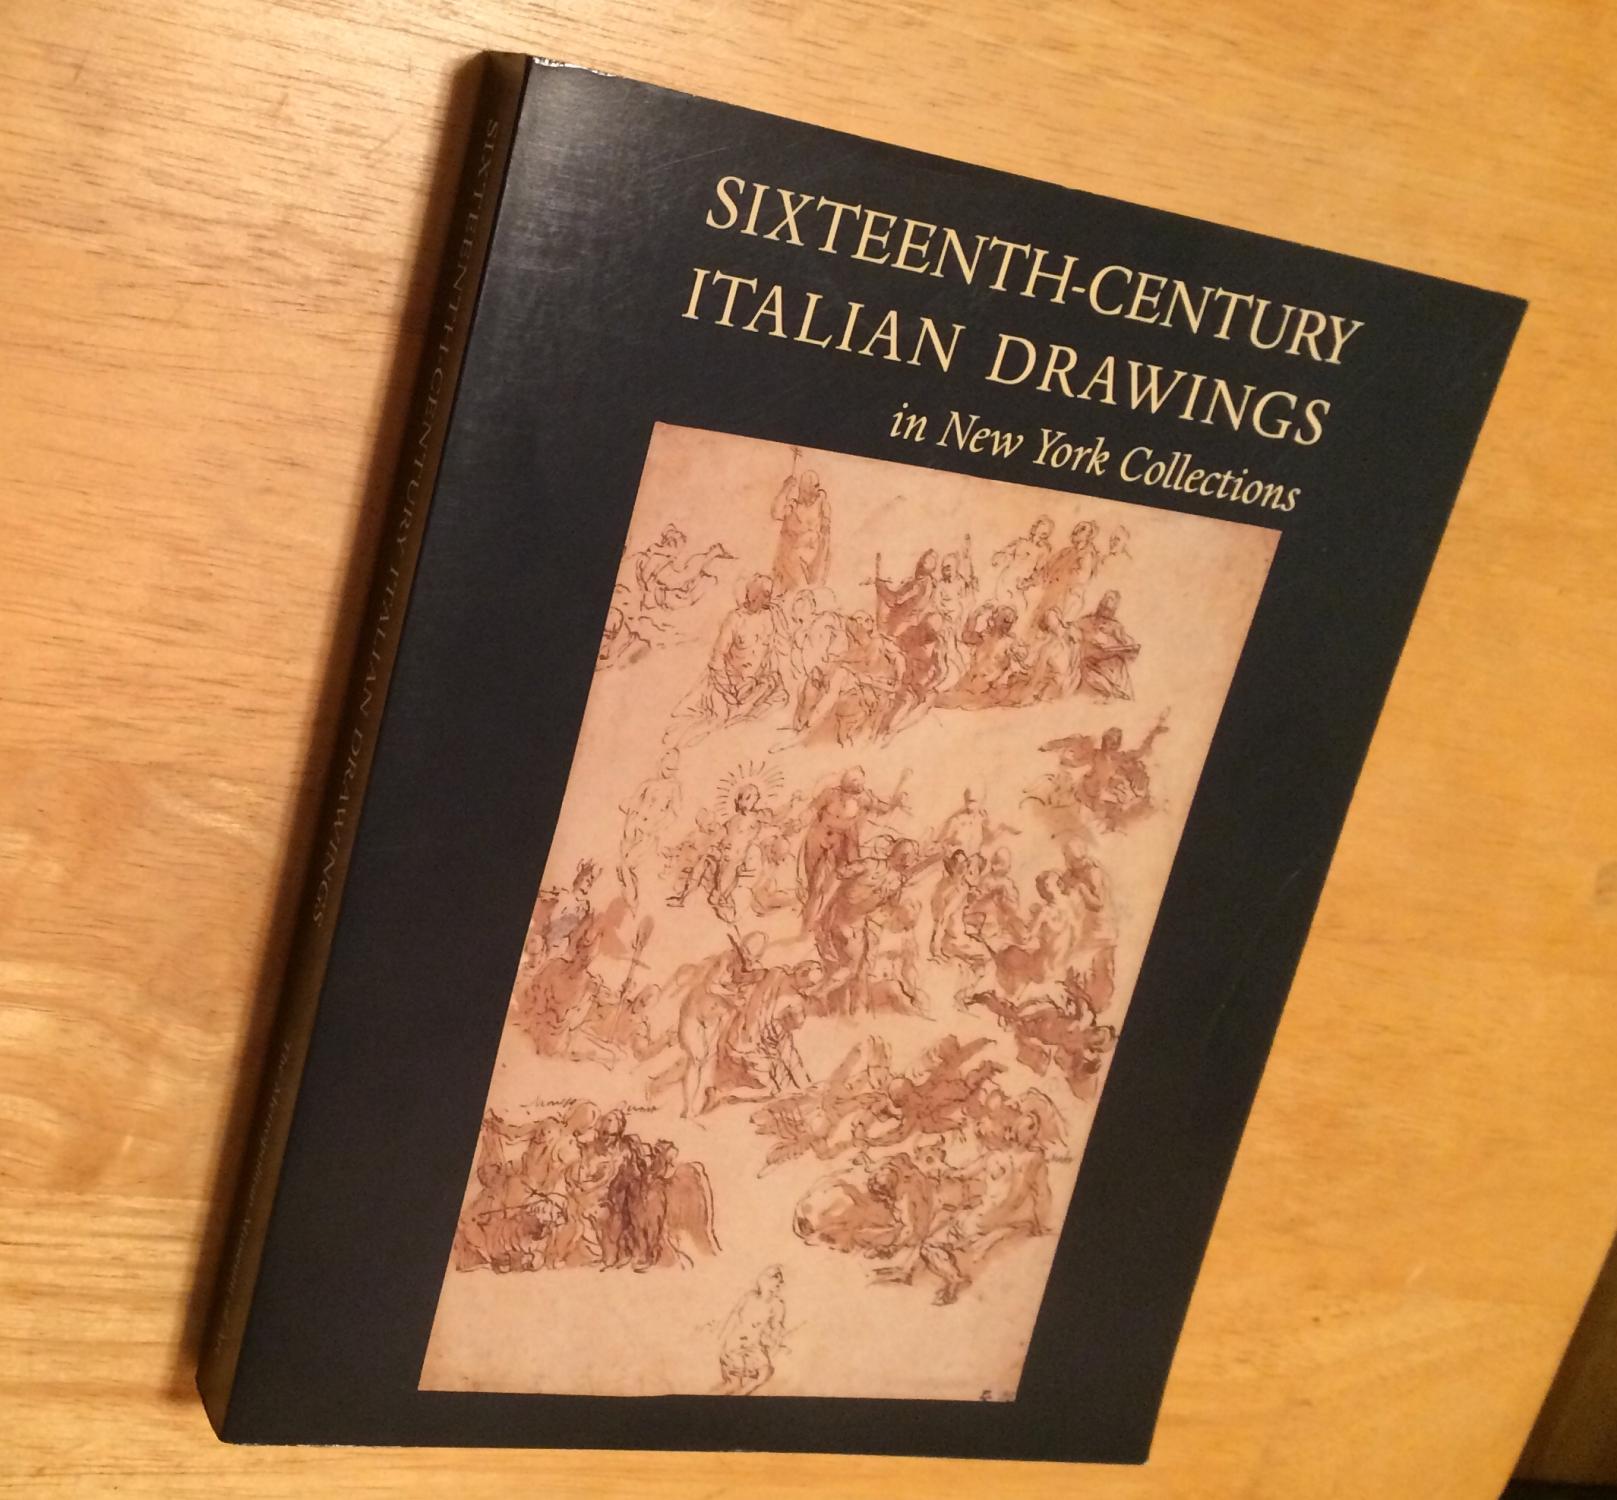 Sixteenth-Century Italian Drawings in New York Collections - William M Griswold & Linda Wolk-Simon